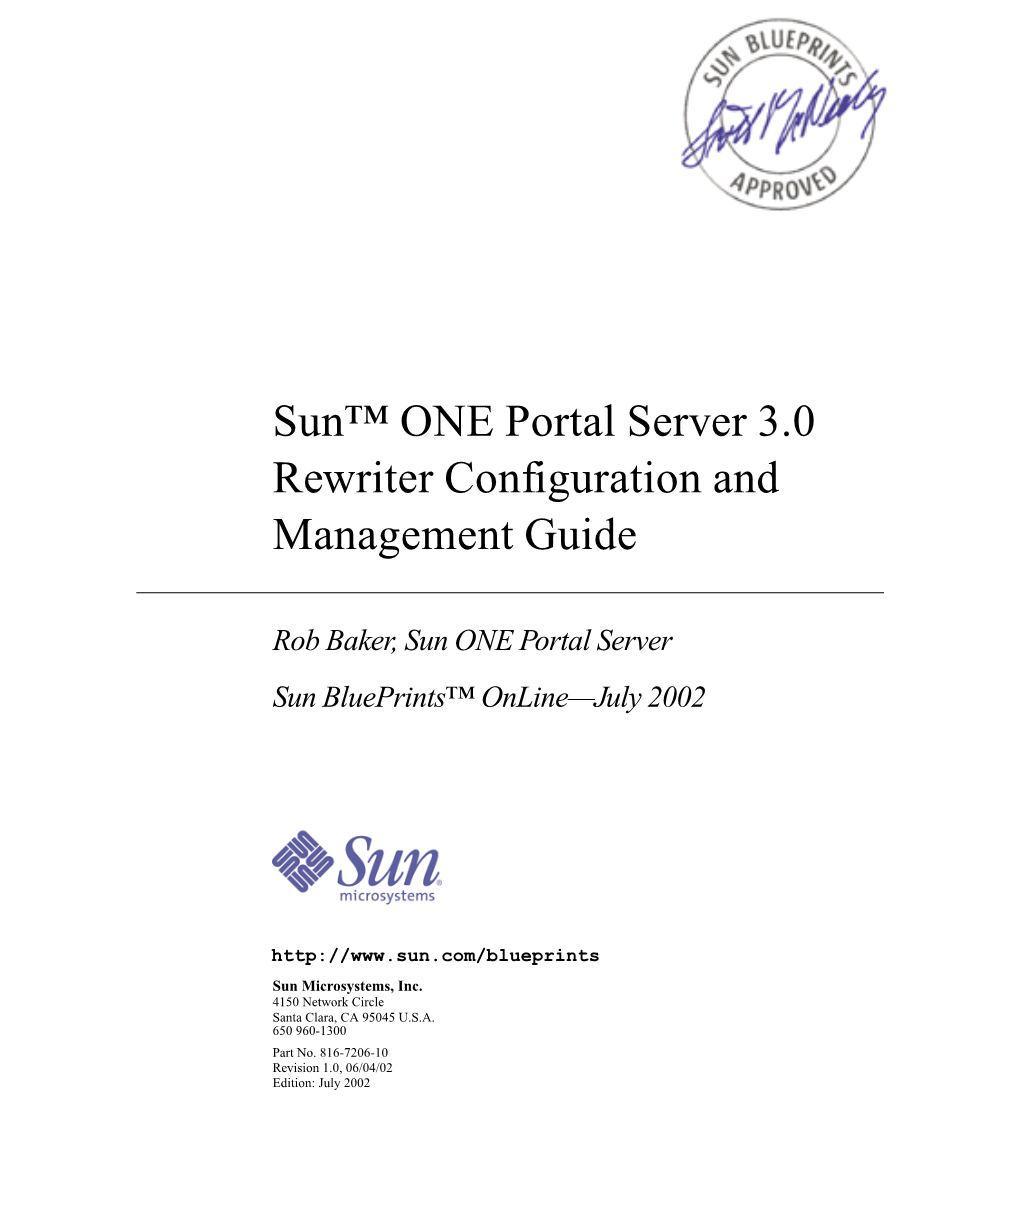 Sun™ ONE Portal Server 3.0 Rewriter Configuration and Management Guide